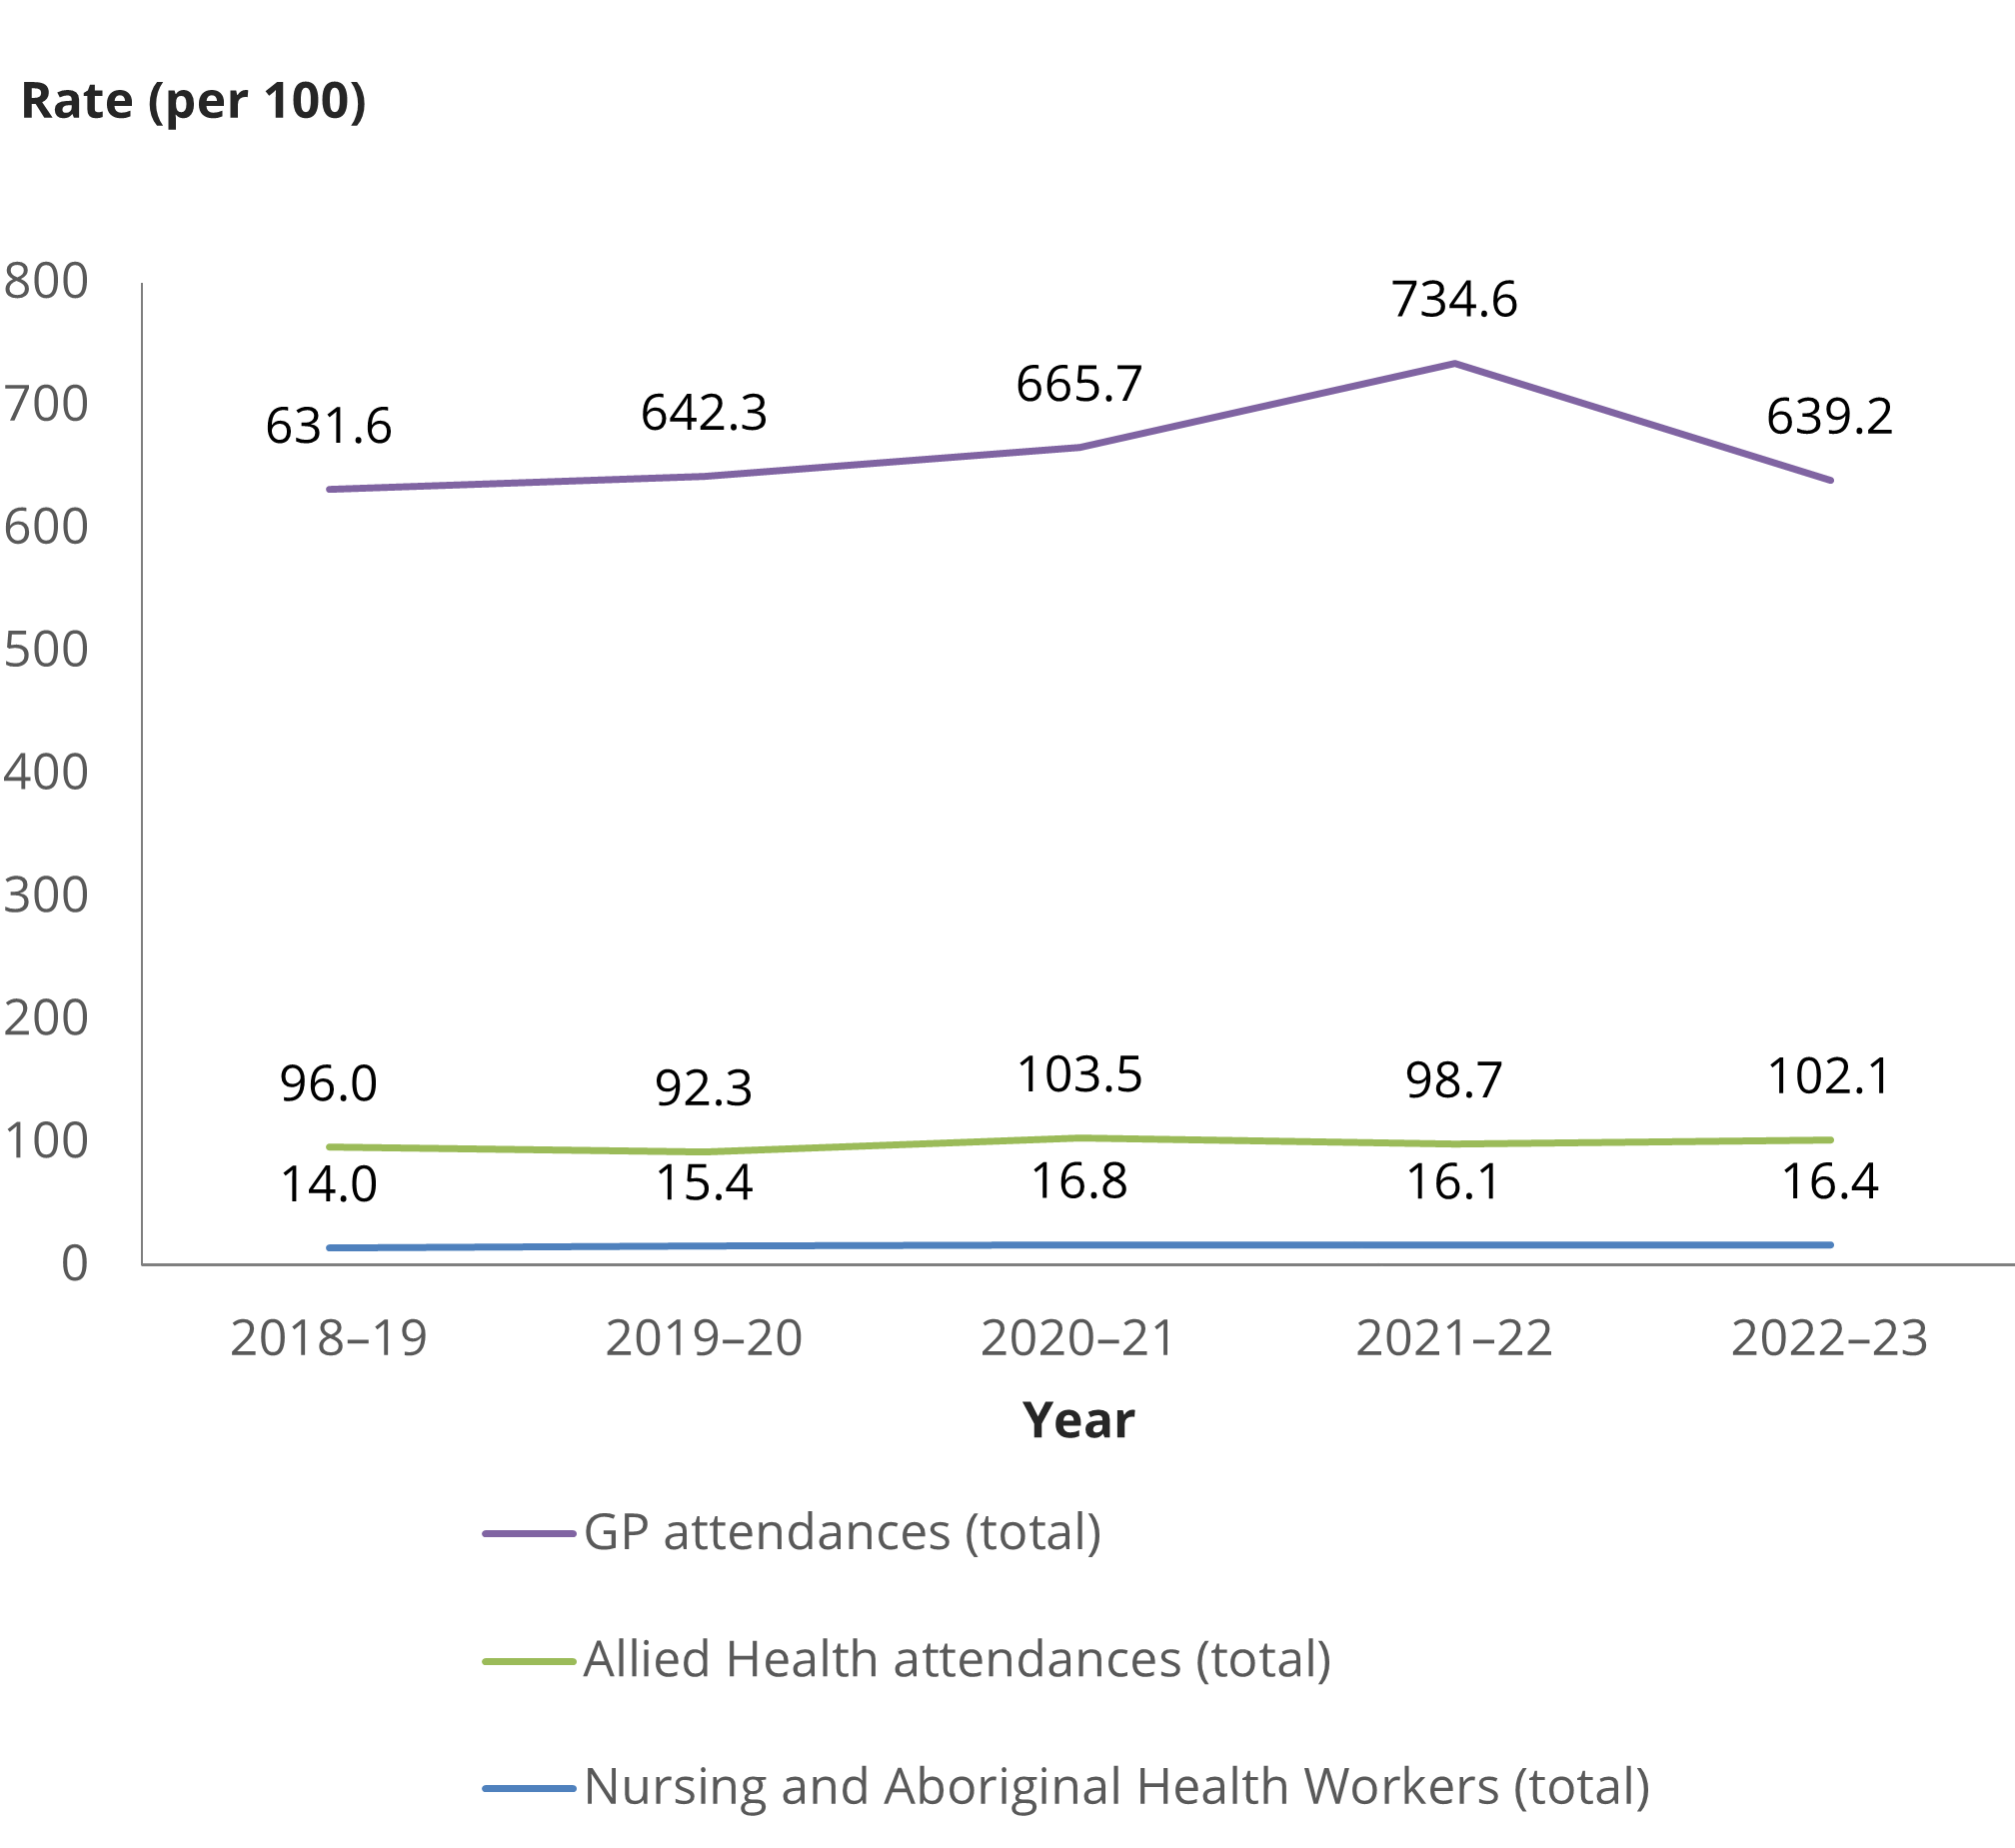 This chart shows that the rate of primary care service varies over time, from 2018–19 to 2022–23.